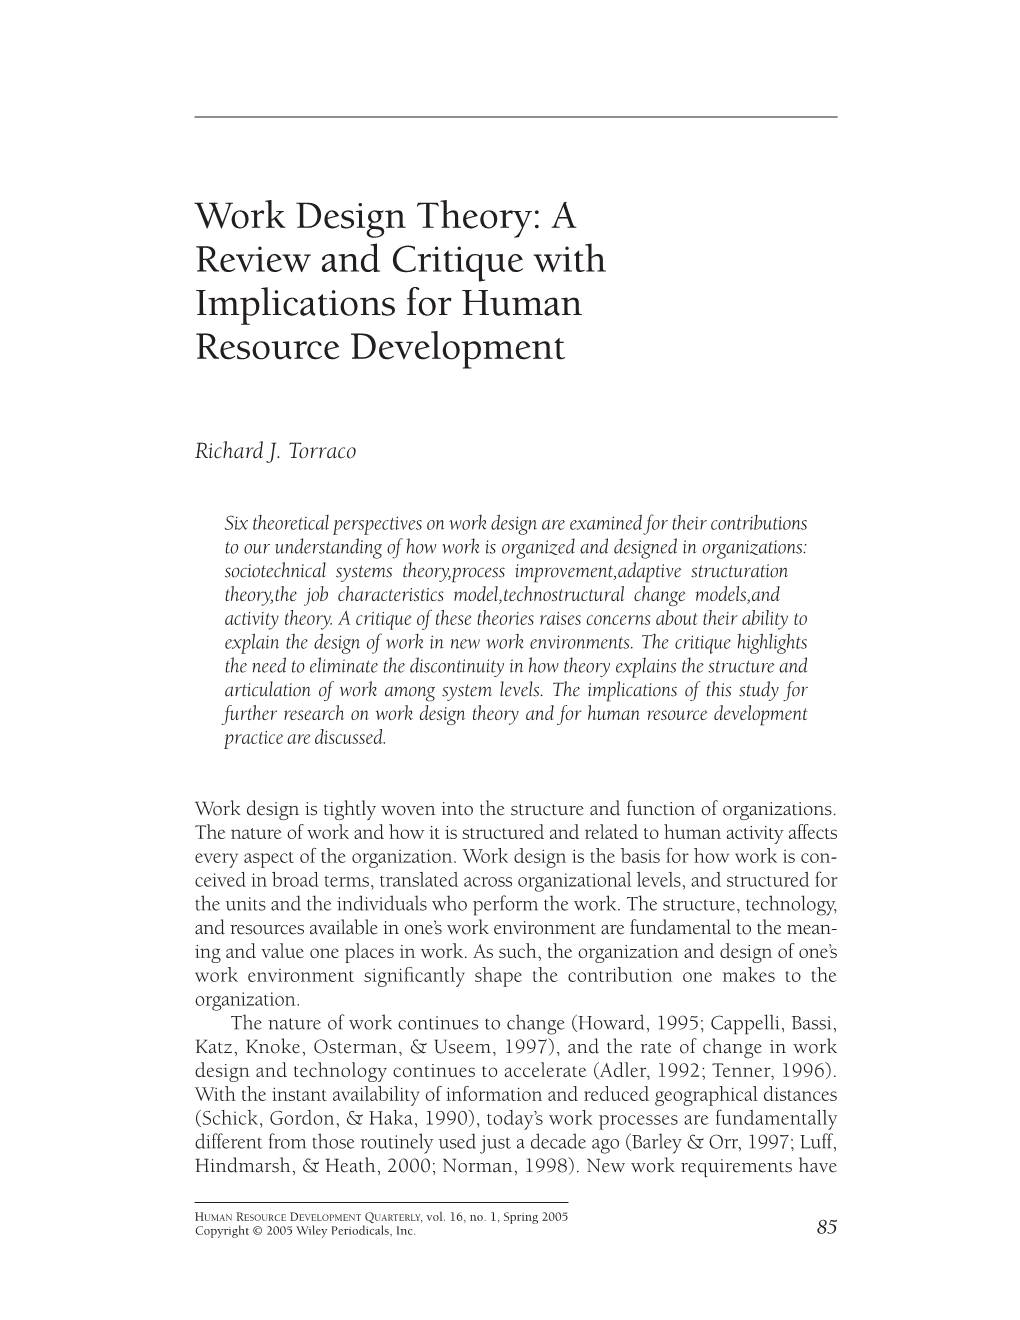 Work Design Theory: a Review and Critique with Implications for Human Resource Development